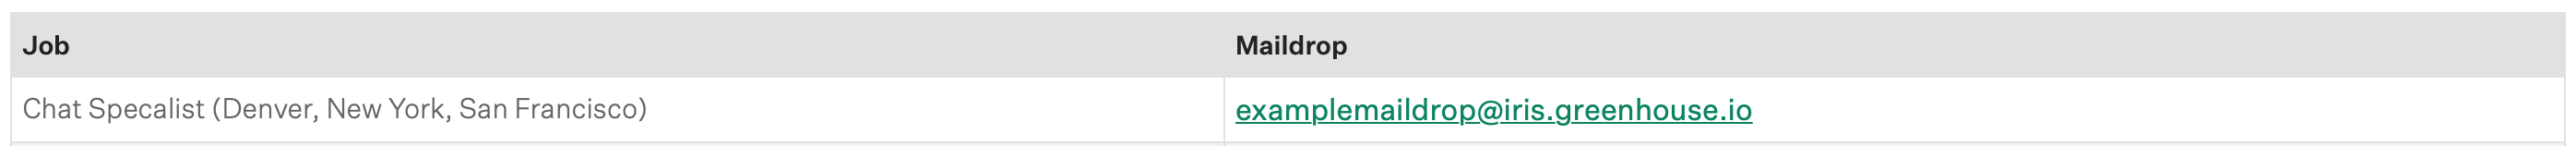 Example-maildrop.png